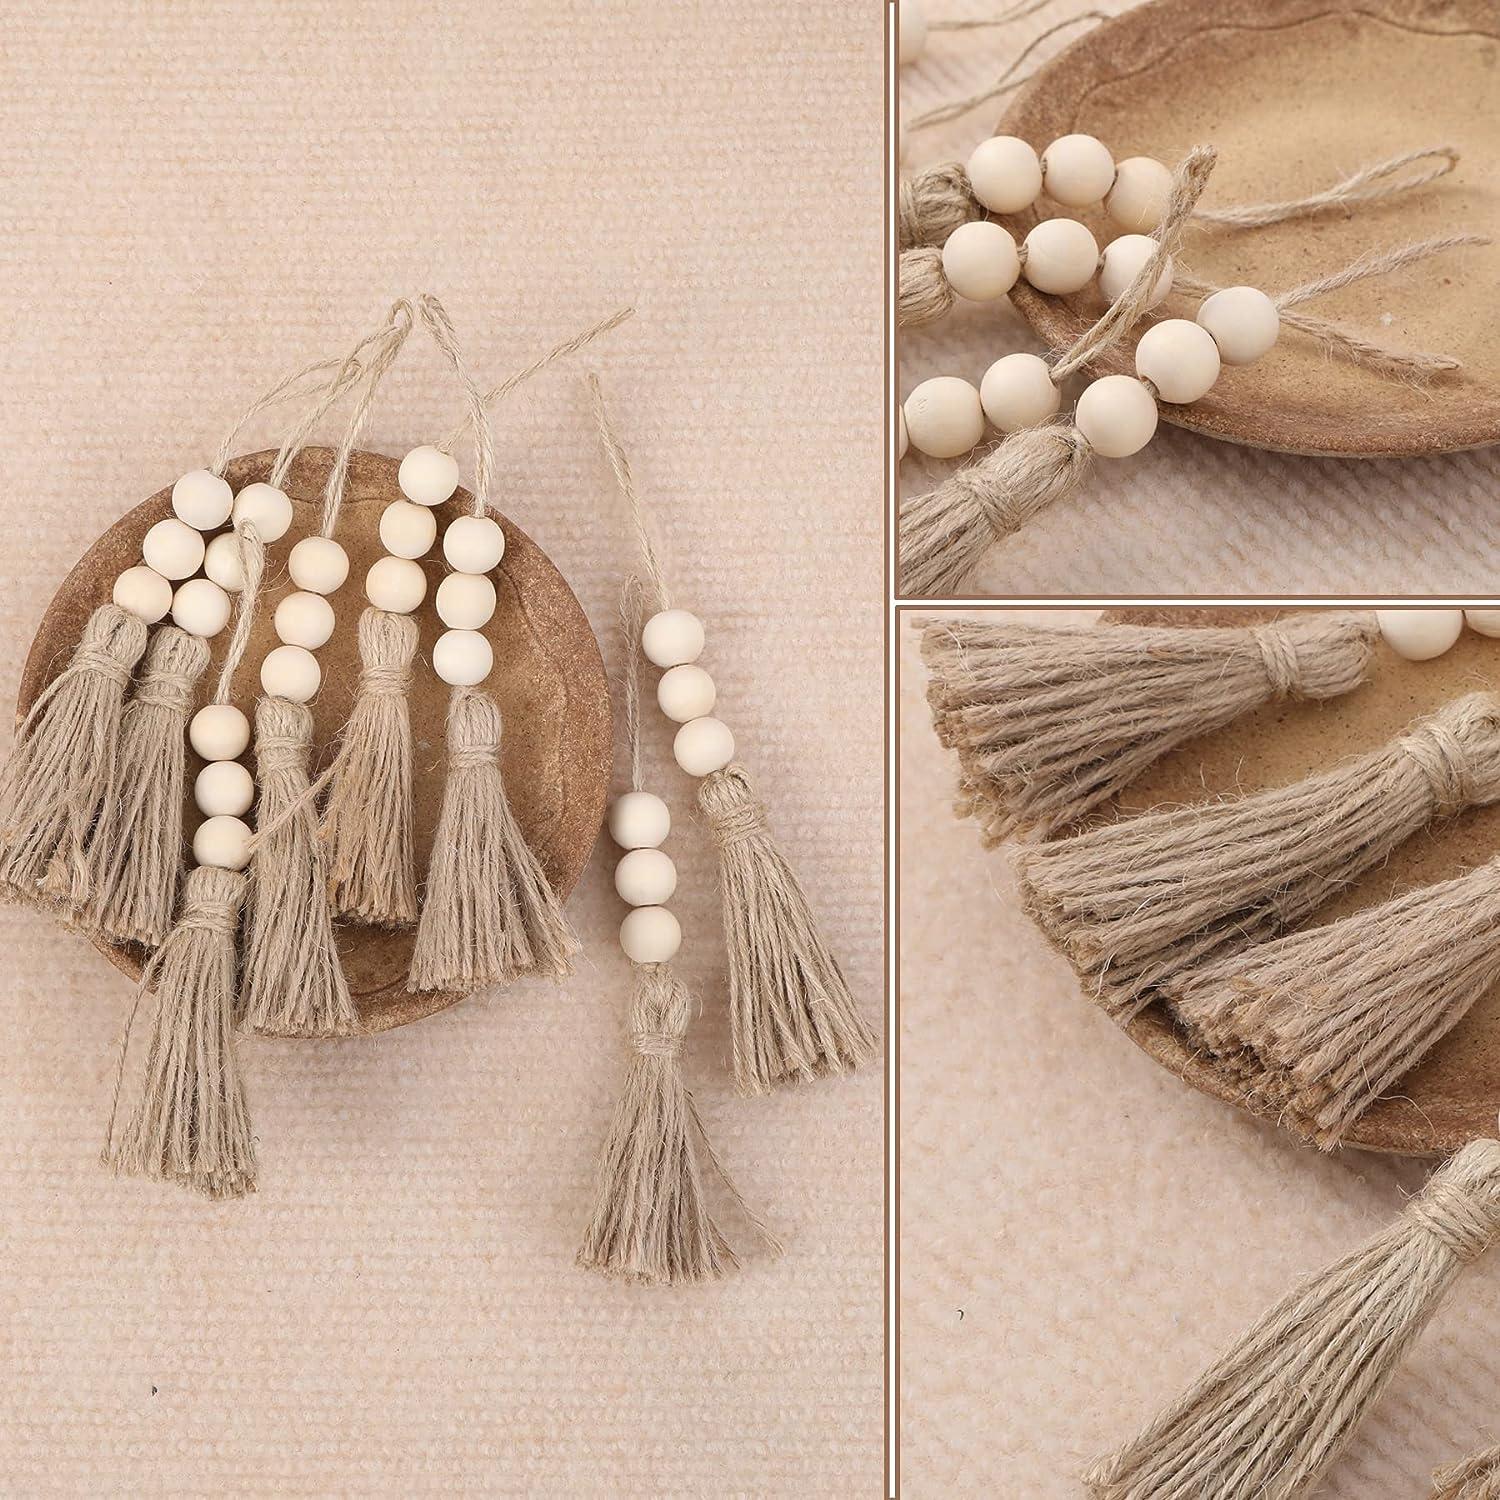 40 Sets Jute Tassels with 3 Wood Beads Natural Jute Rope Tassels Beaded  Tassels for Crafts Farmhouse Decorative Sewing Tassels Home Decor Tassels  for